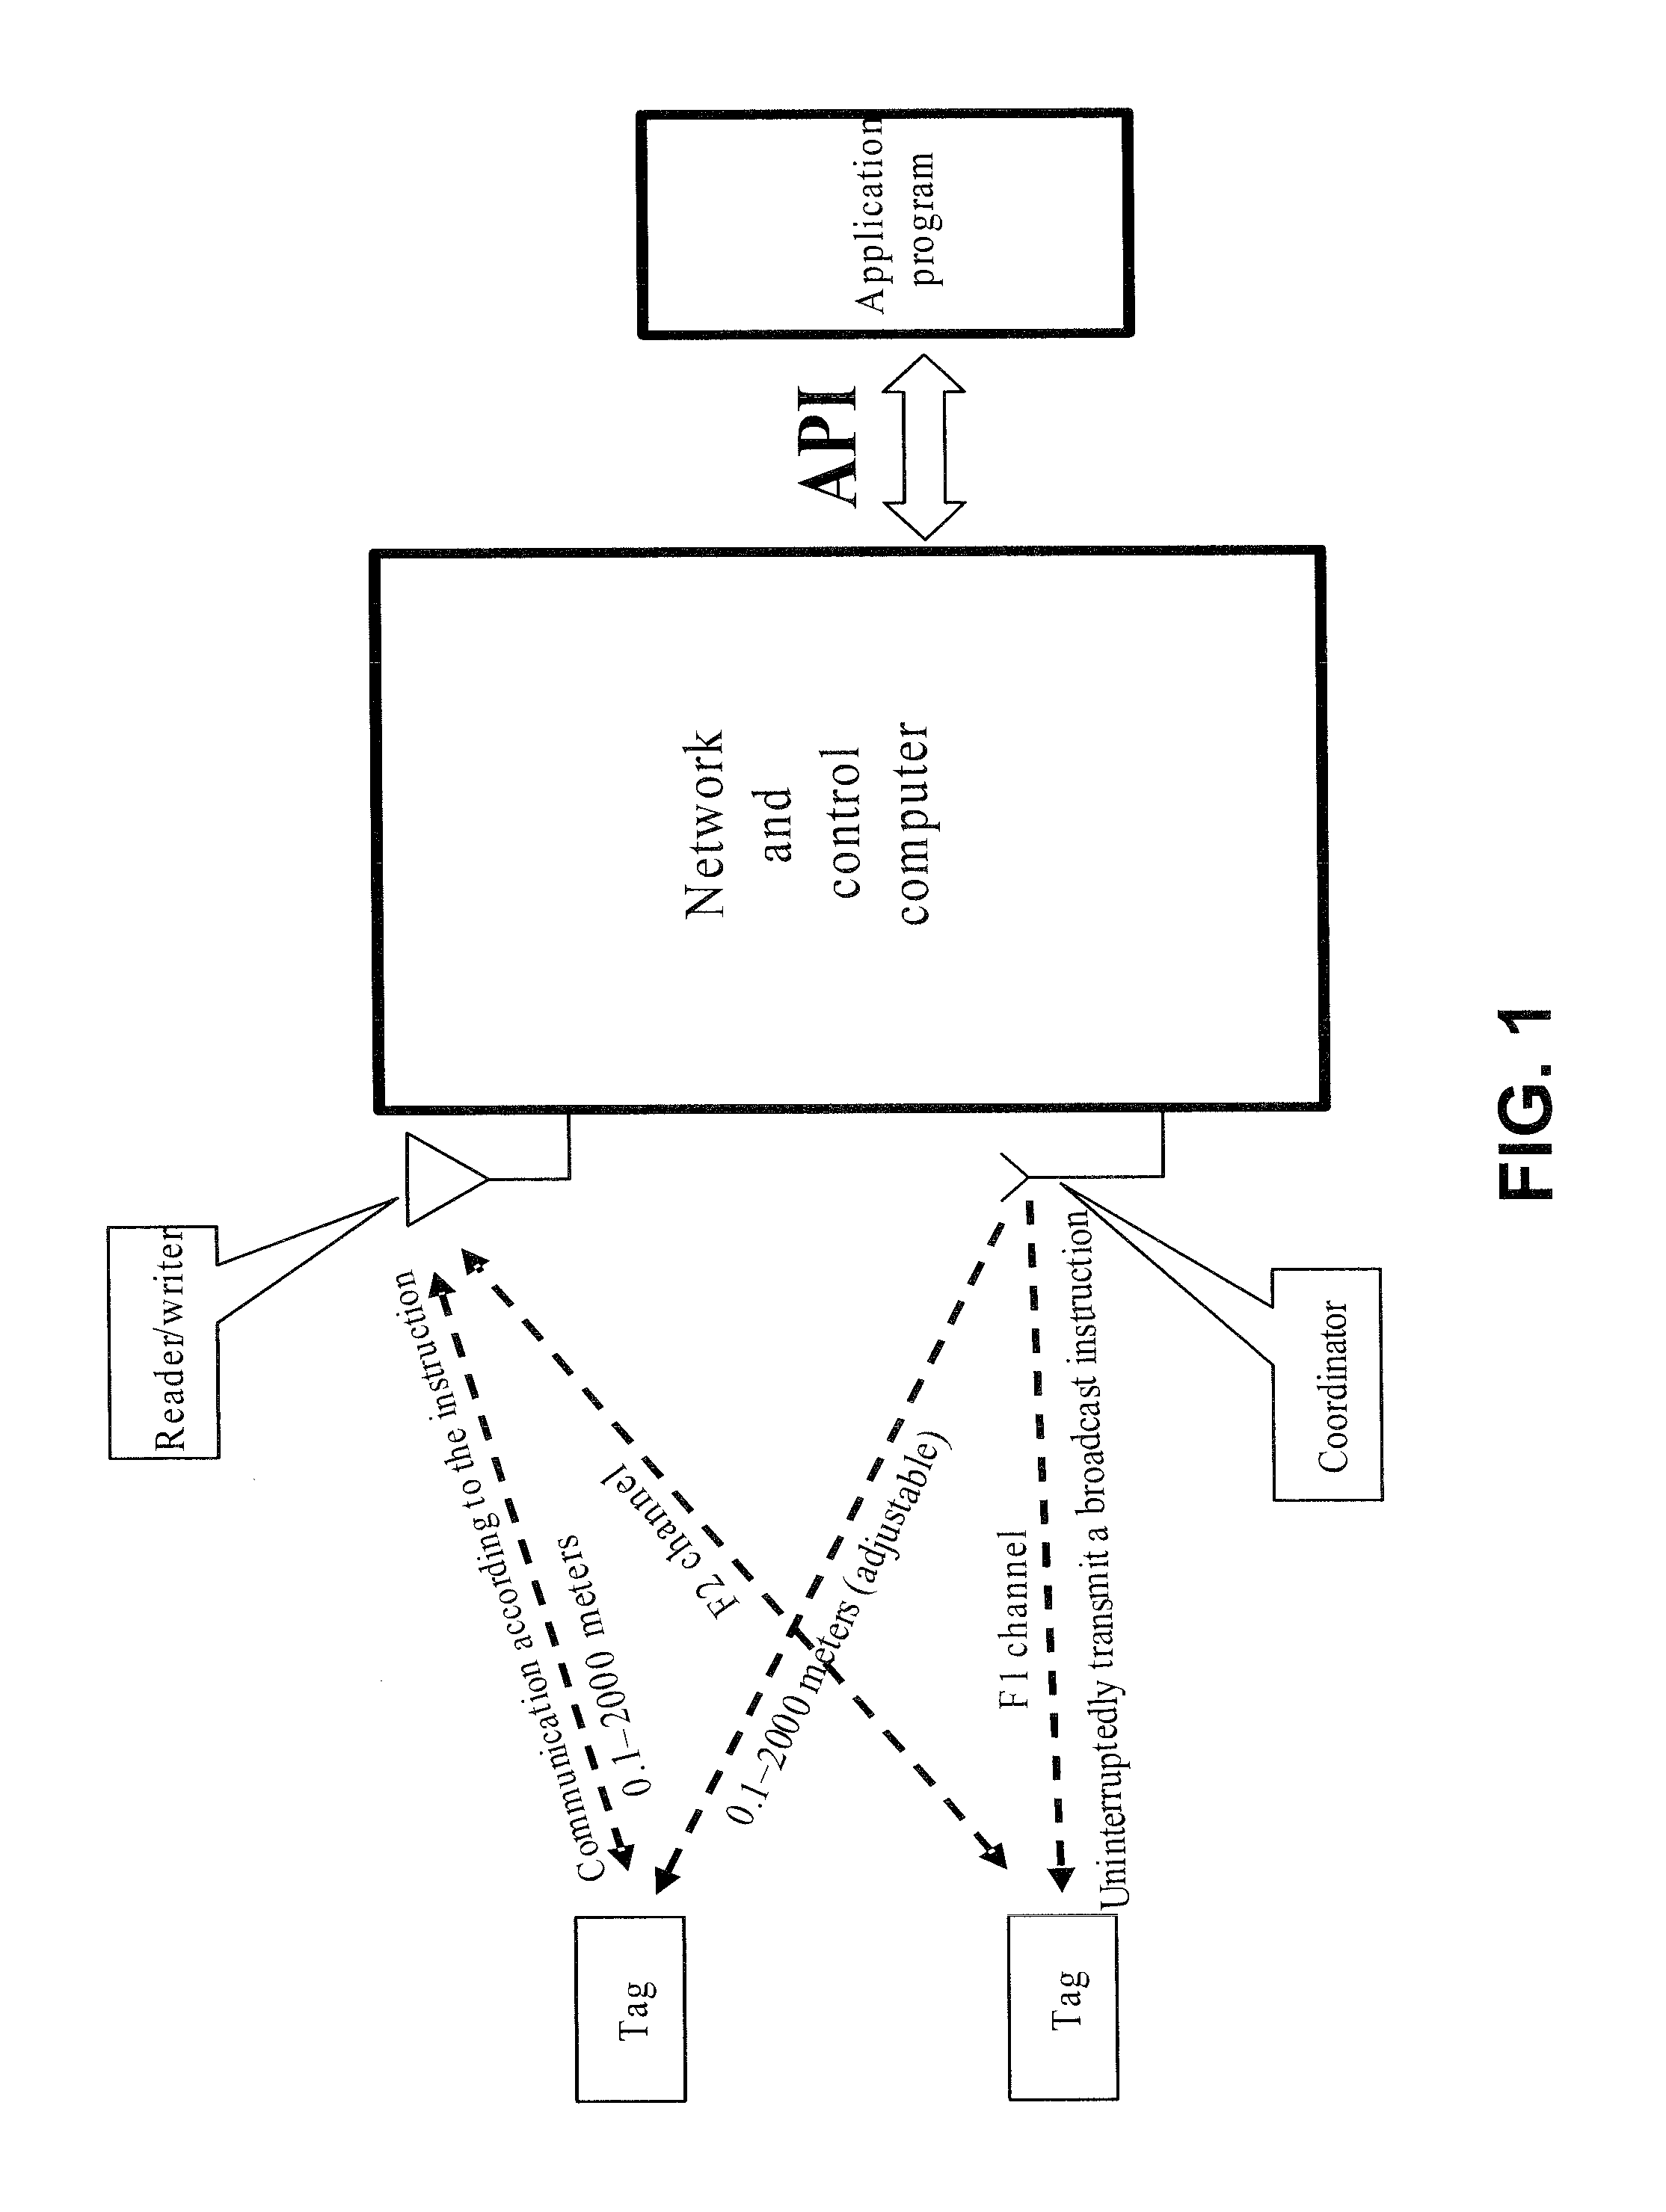 Active RFID tag, application system and method thereof